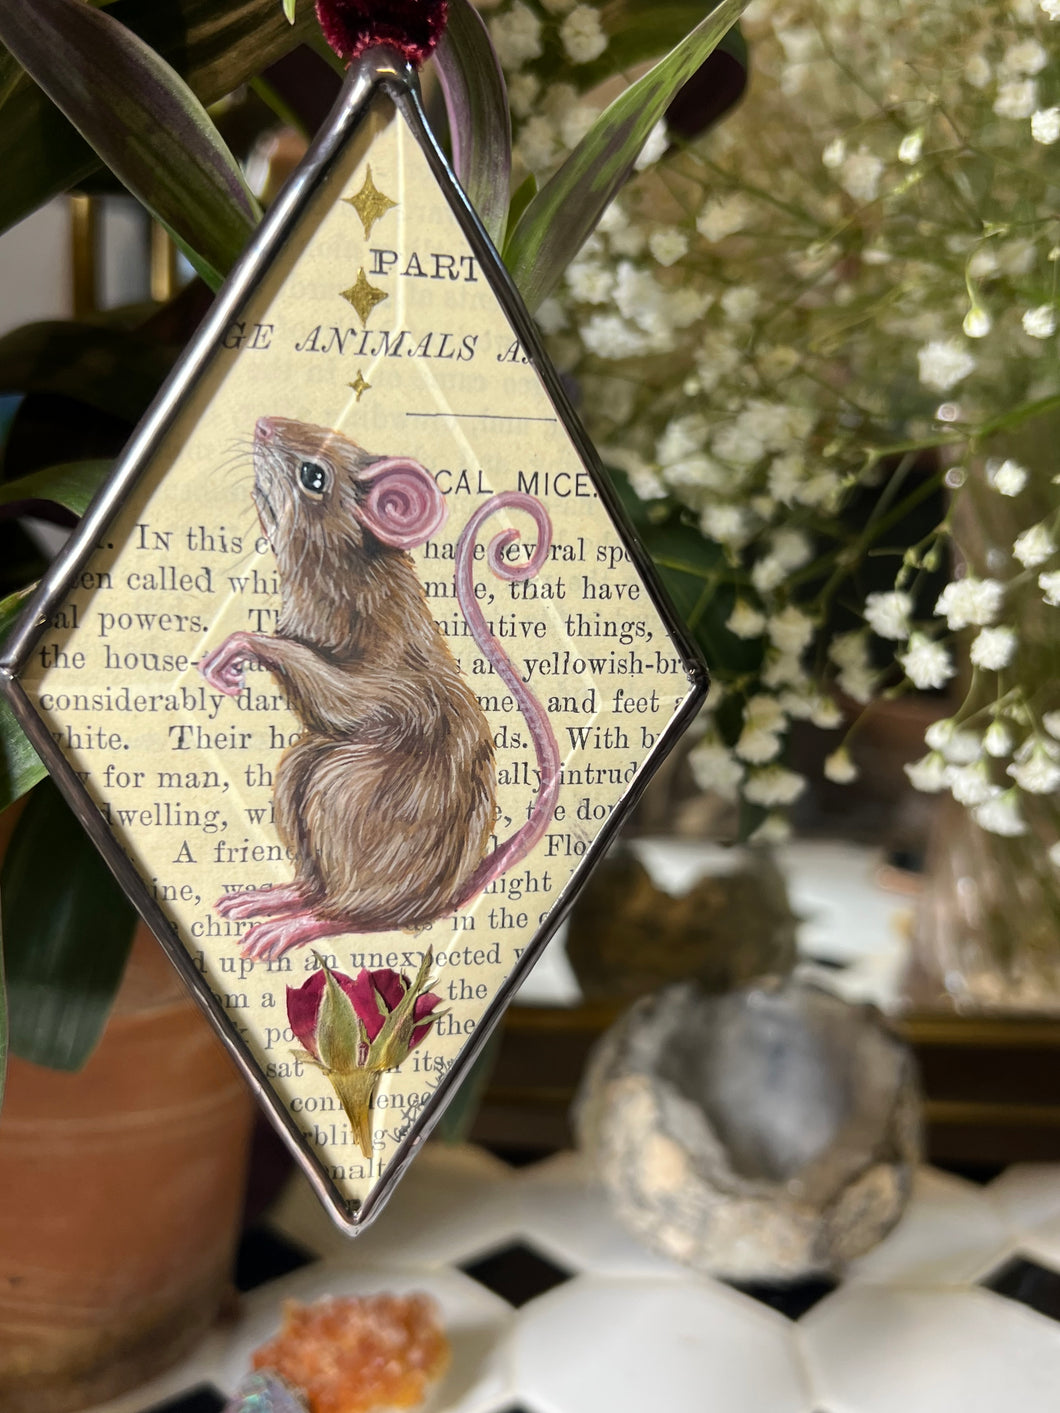 Painted brown mouse and golden stars. Diamond shape. Gouache and gilding paint on vintage book page in beveled glass.